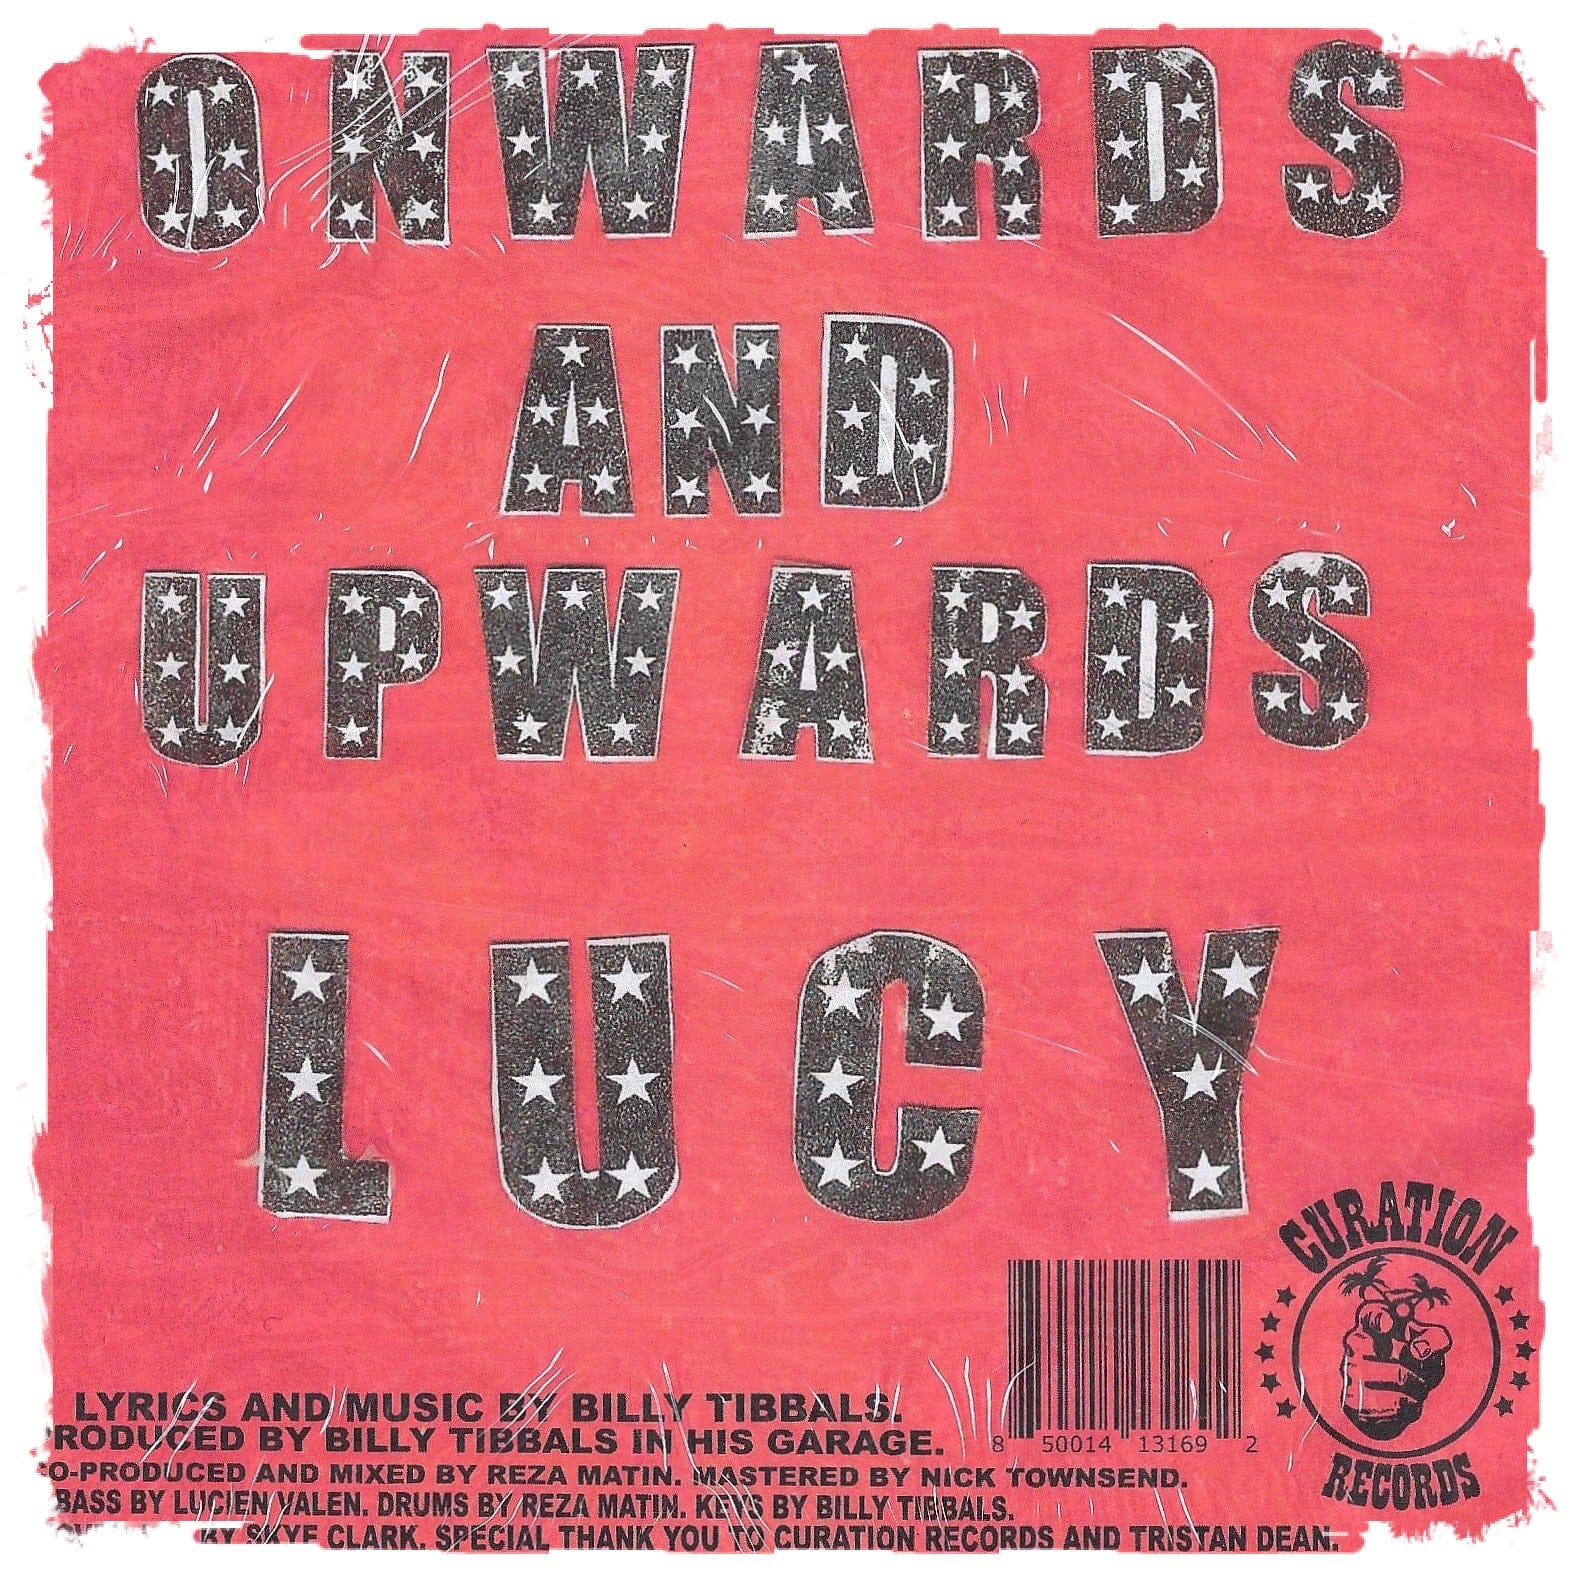 Onwards and Upwards / Lucy - 7" Single (7030598172754)